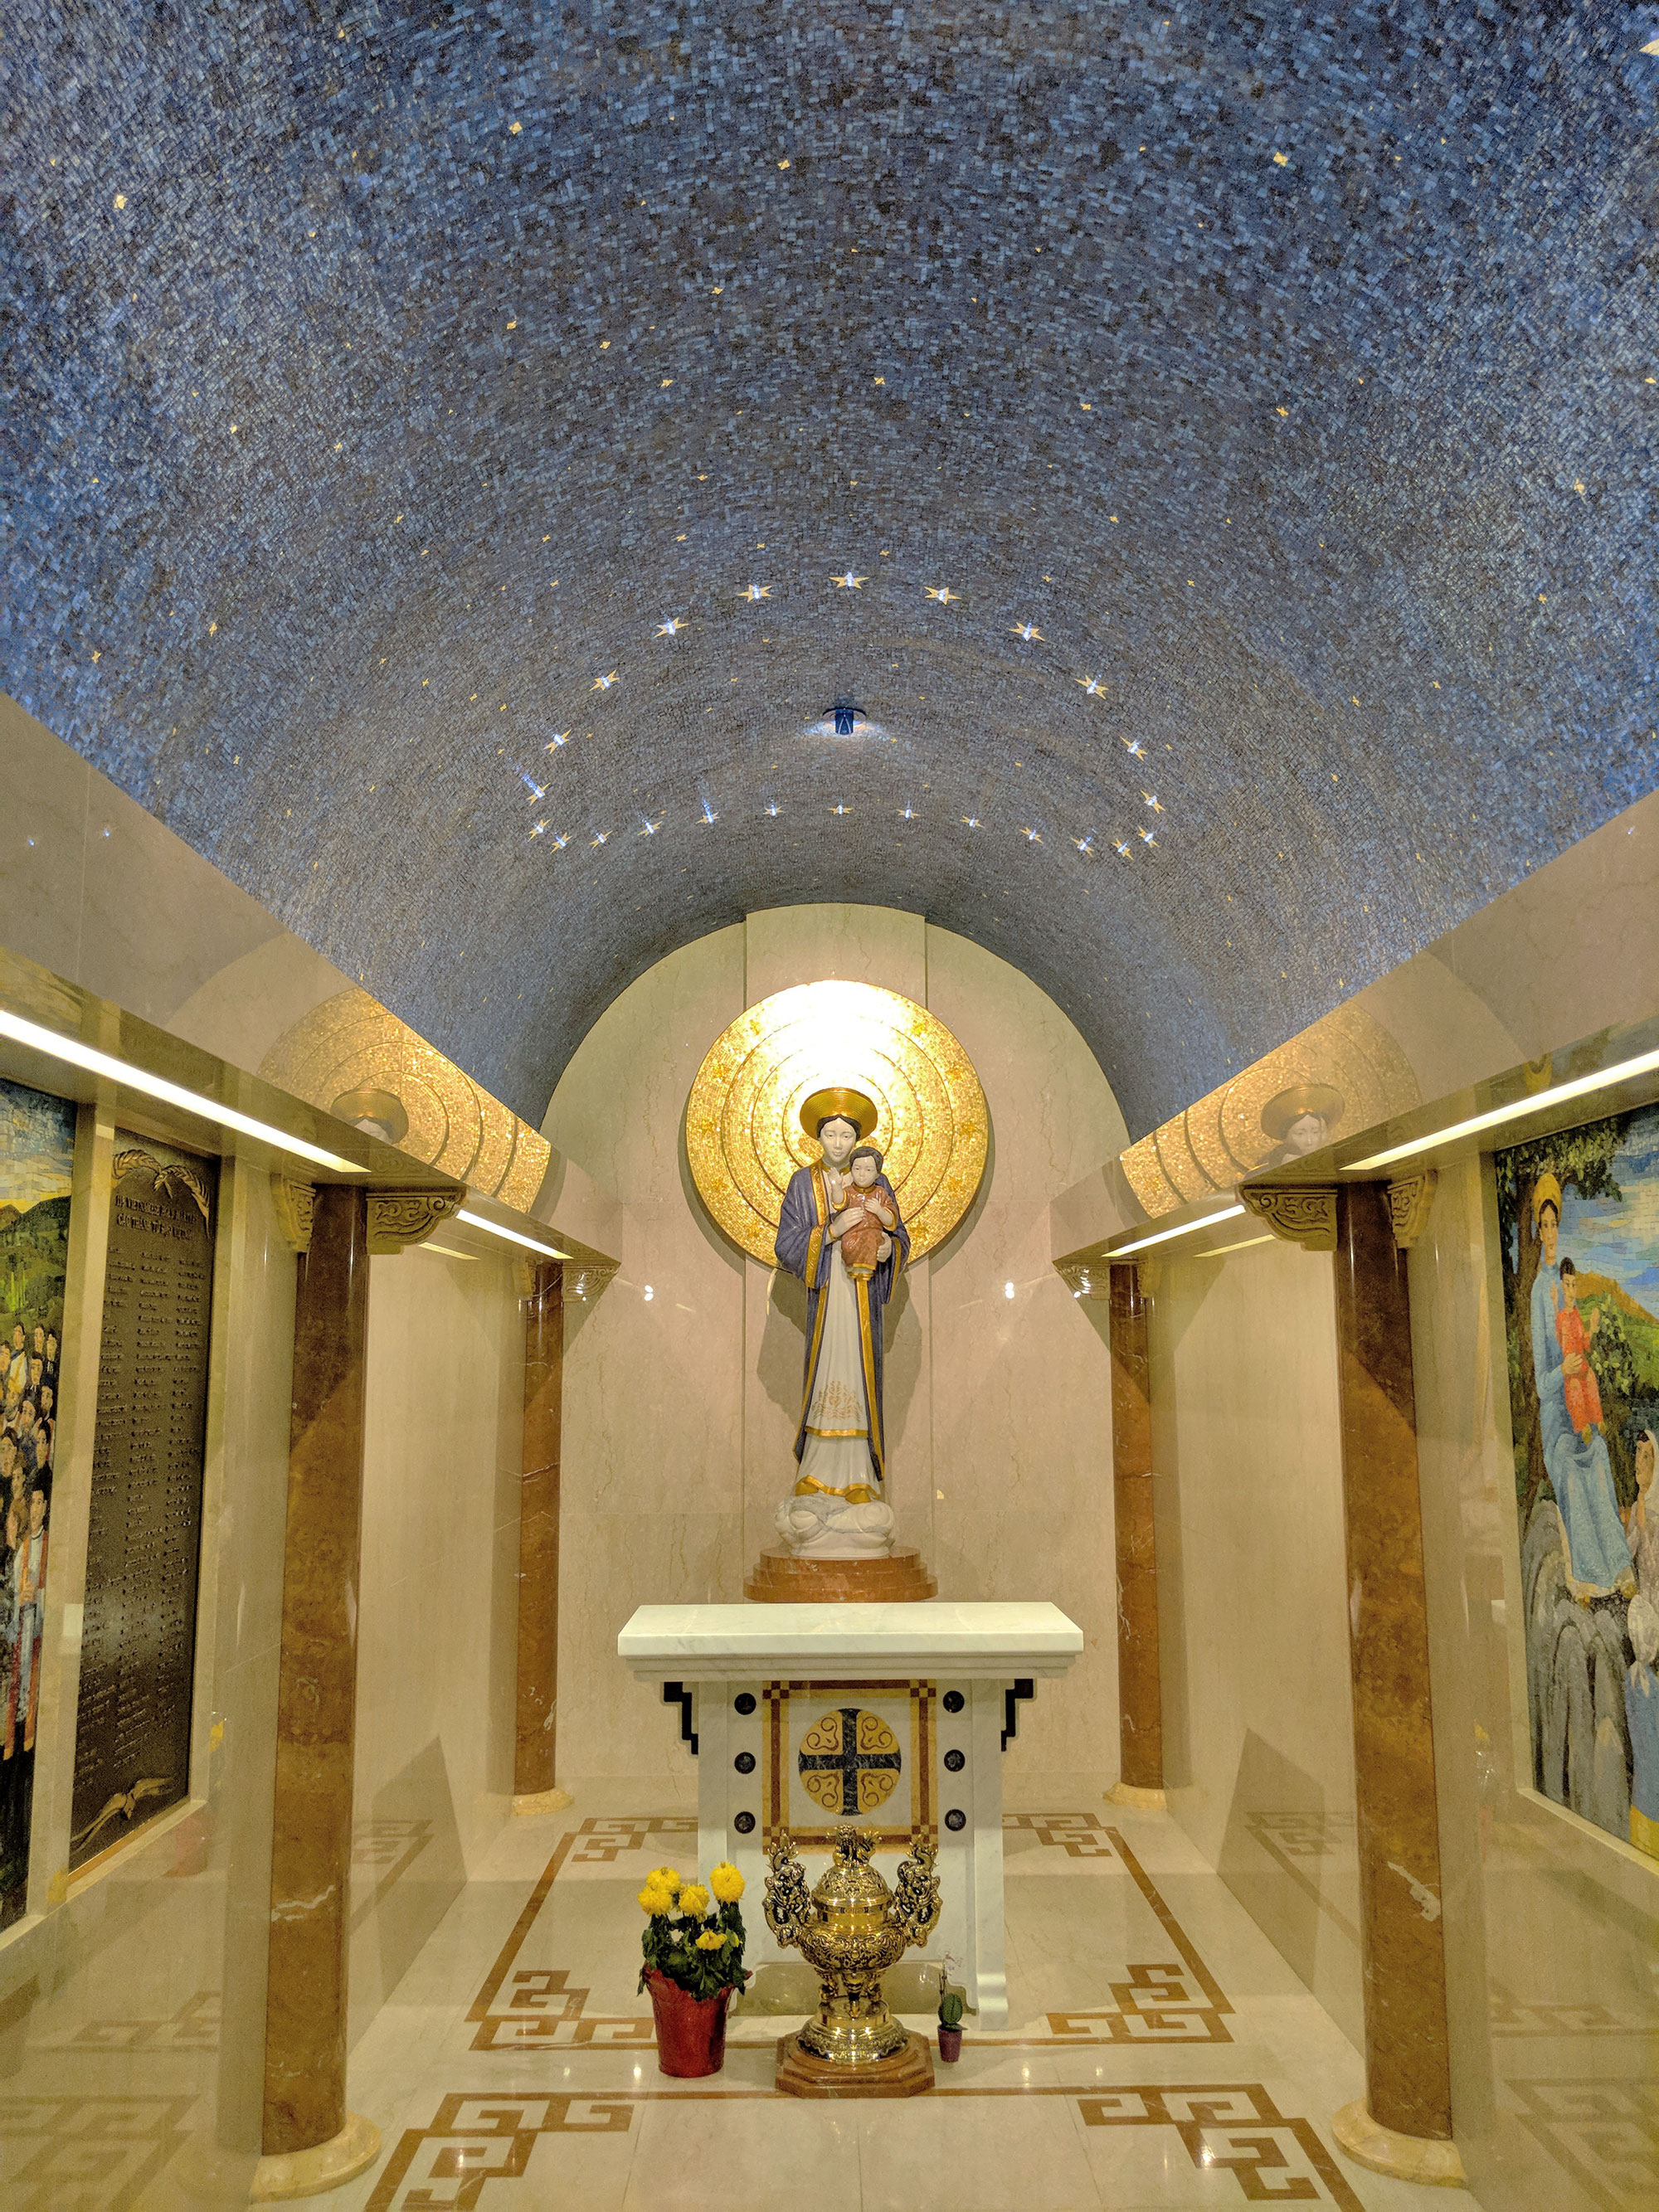 The Our Lady of La Vang statue at the National Shrine.